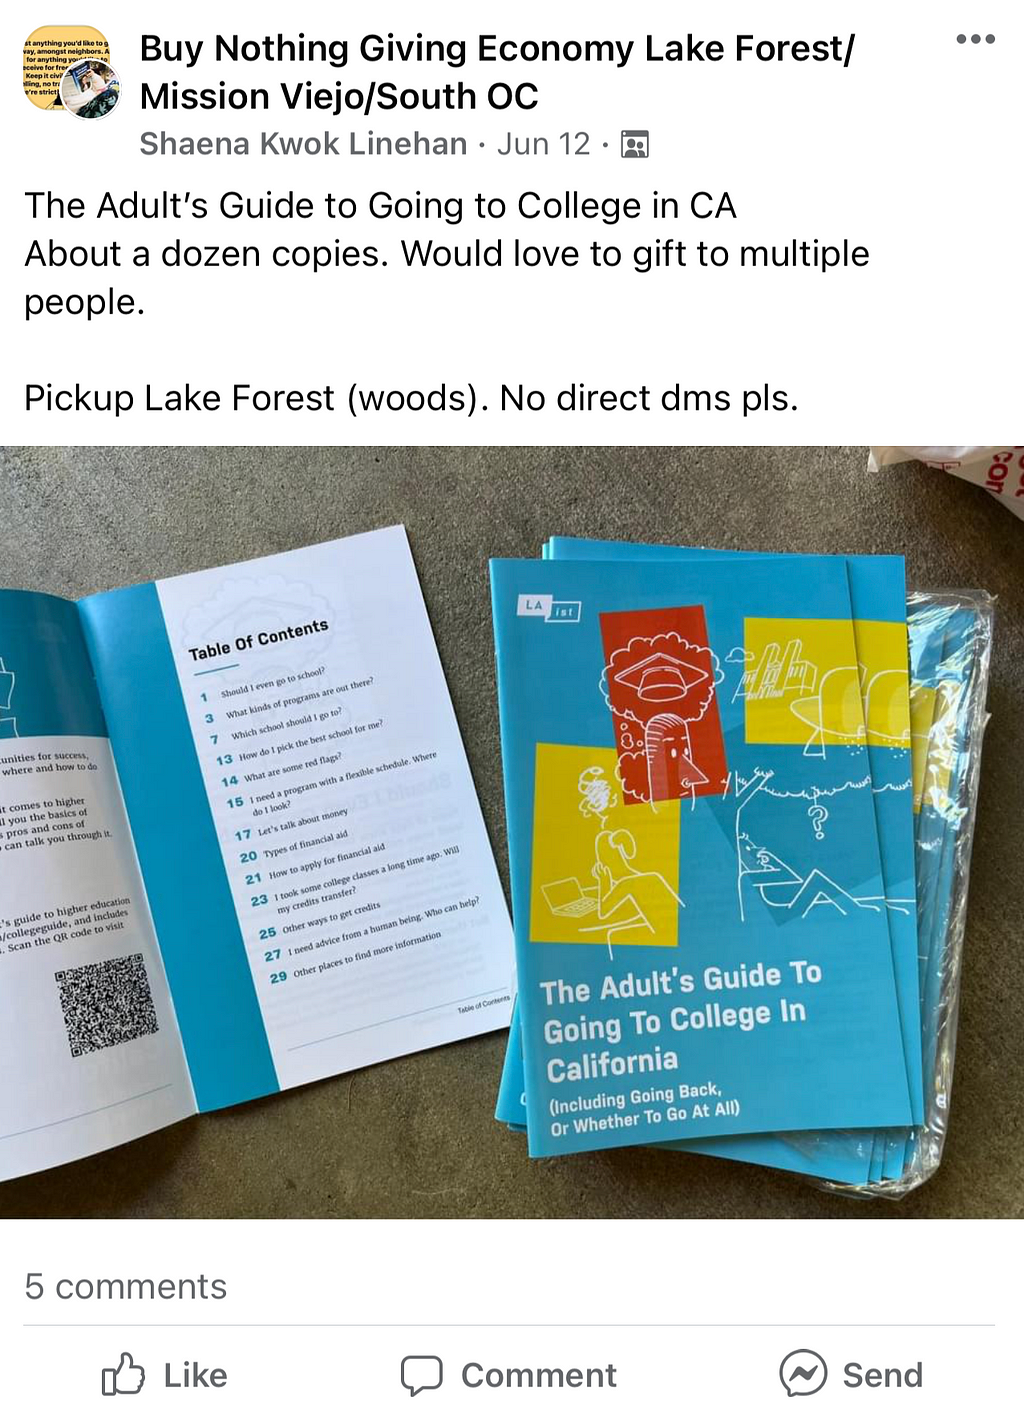 Social Media post featured in a local Buy Nothing Facebook group, offering free copies of guide books to residents in Lake Forest, Mission Viejo, and South Orange County